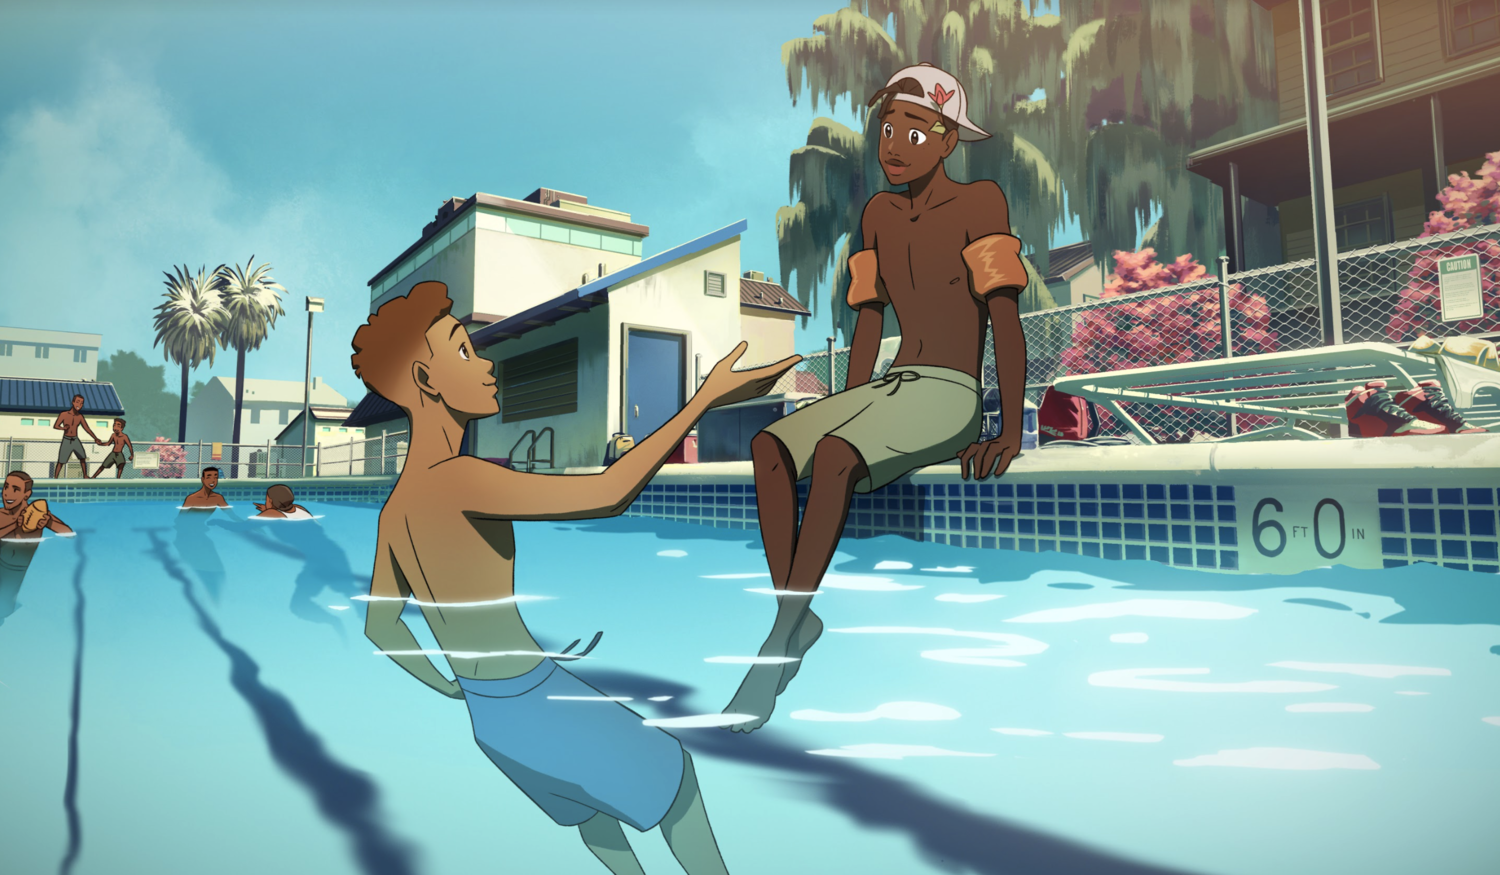 Filmmaking Duo Set To Shake Up Animation With Historic Black Queer Film  'Pritty' — The Reckoning